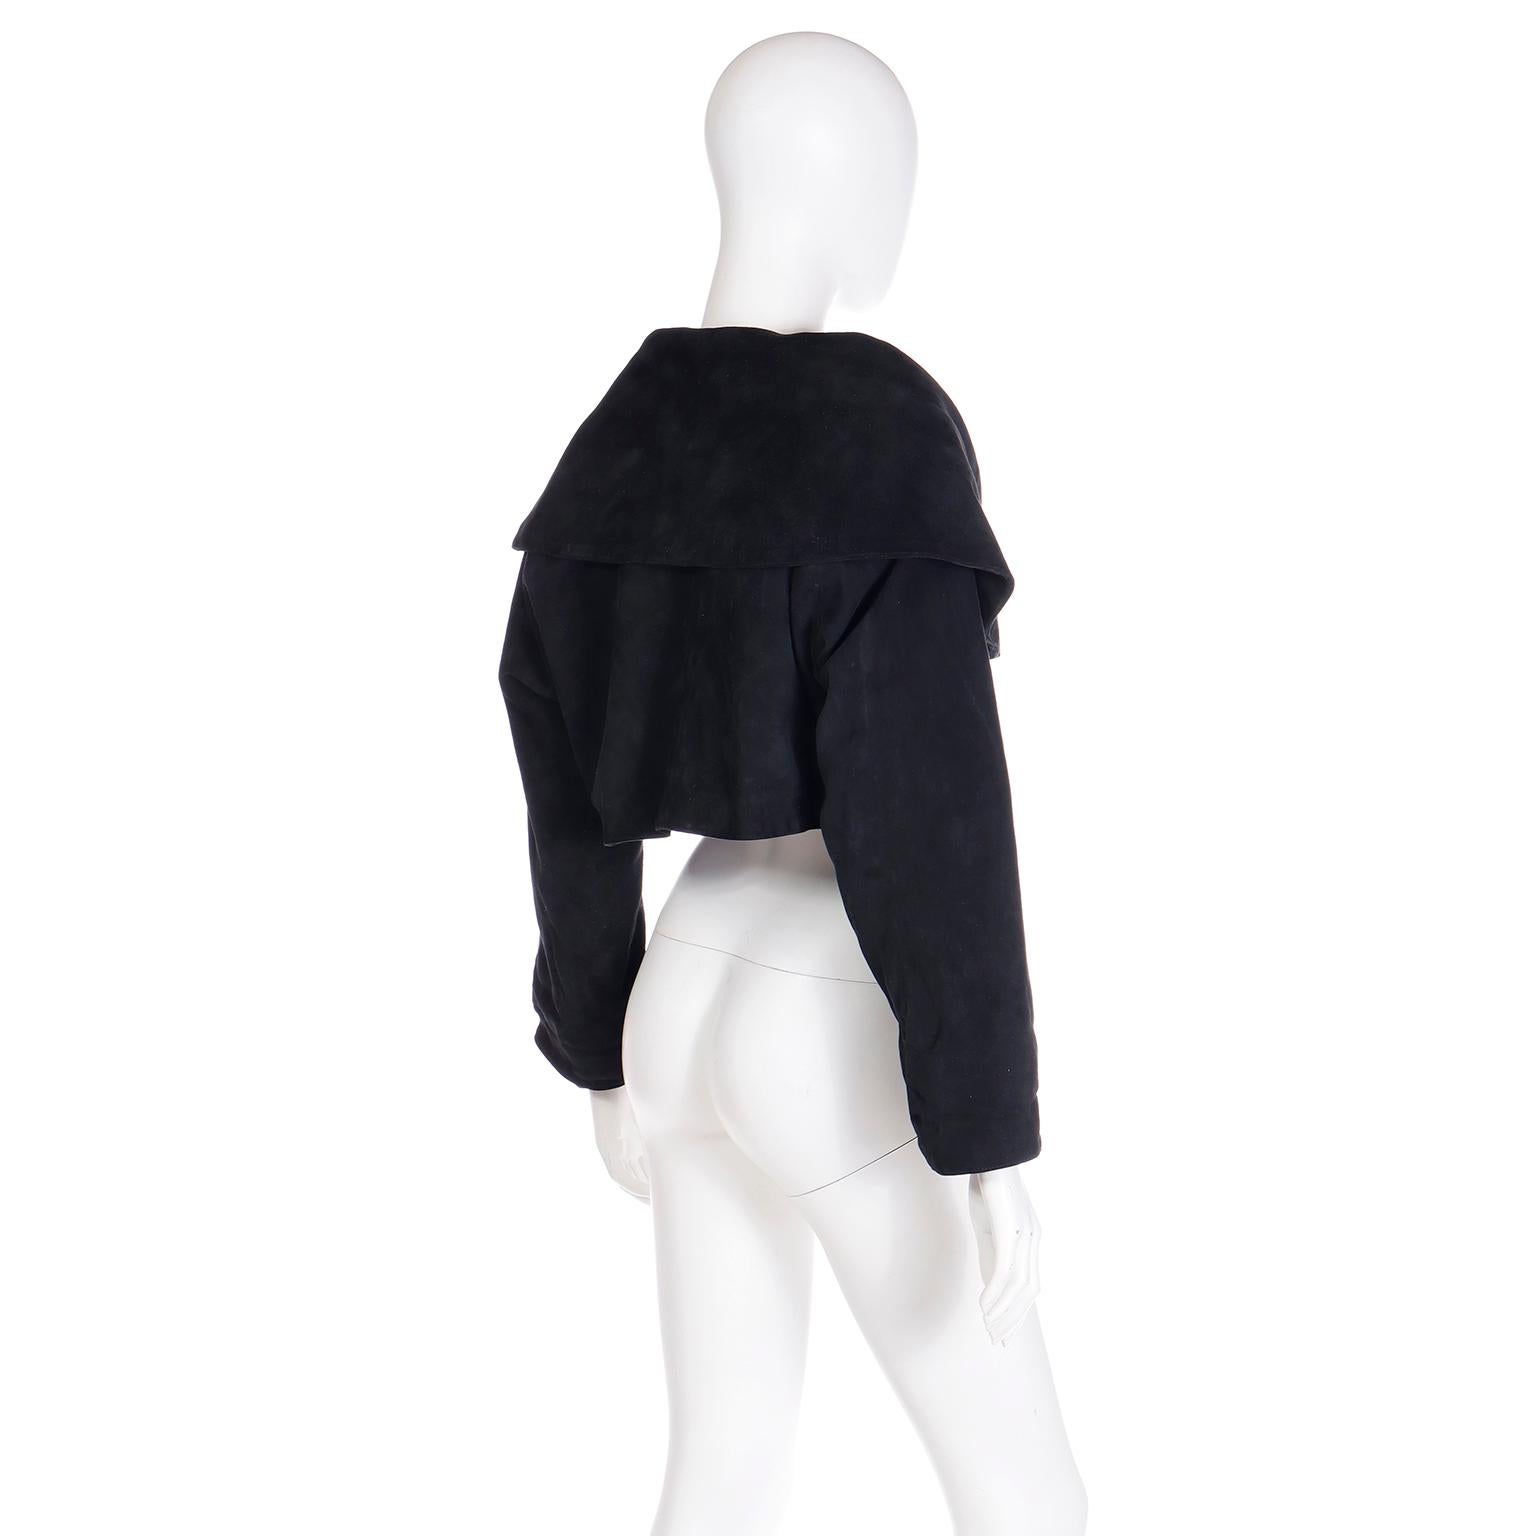 Azzedine Alaia Fall 1989 Vintage Black Lamb Suede Cropped Runway Jacket For Sale 1